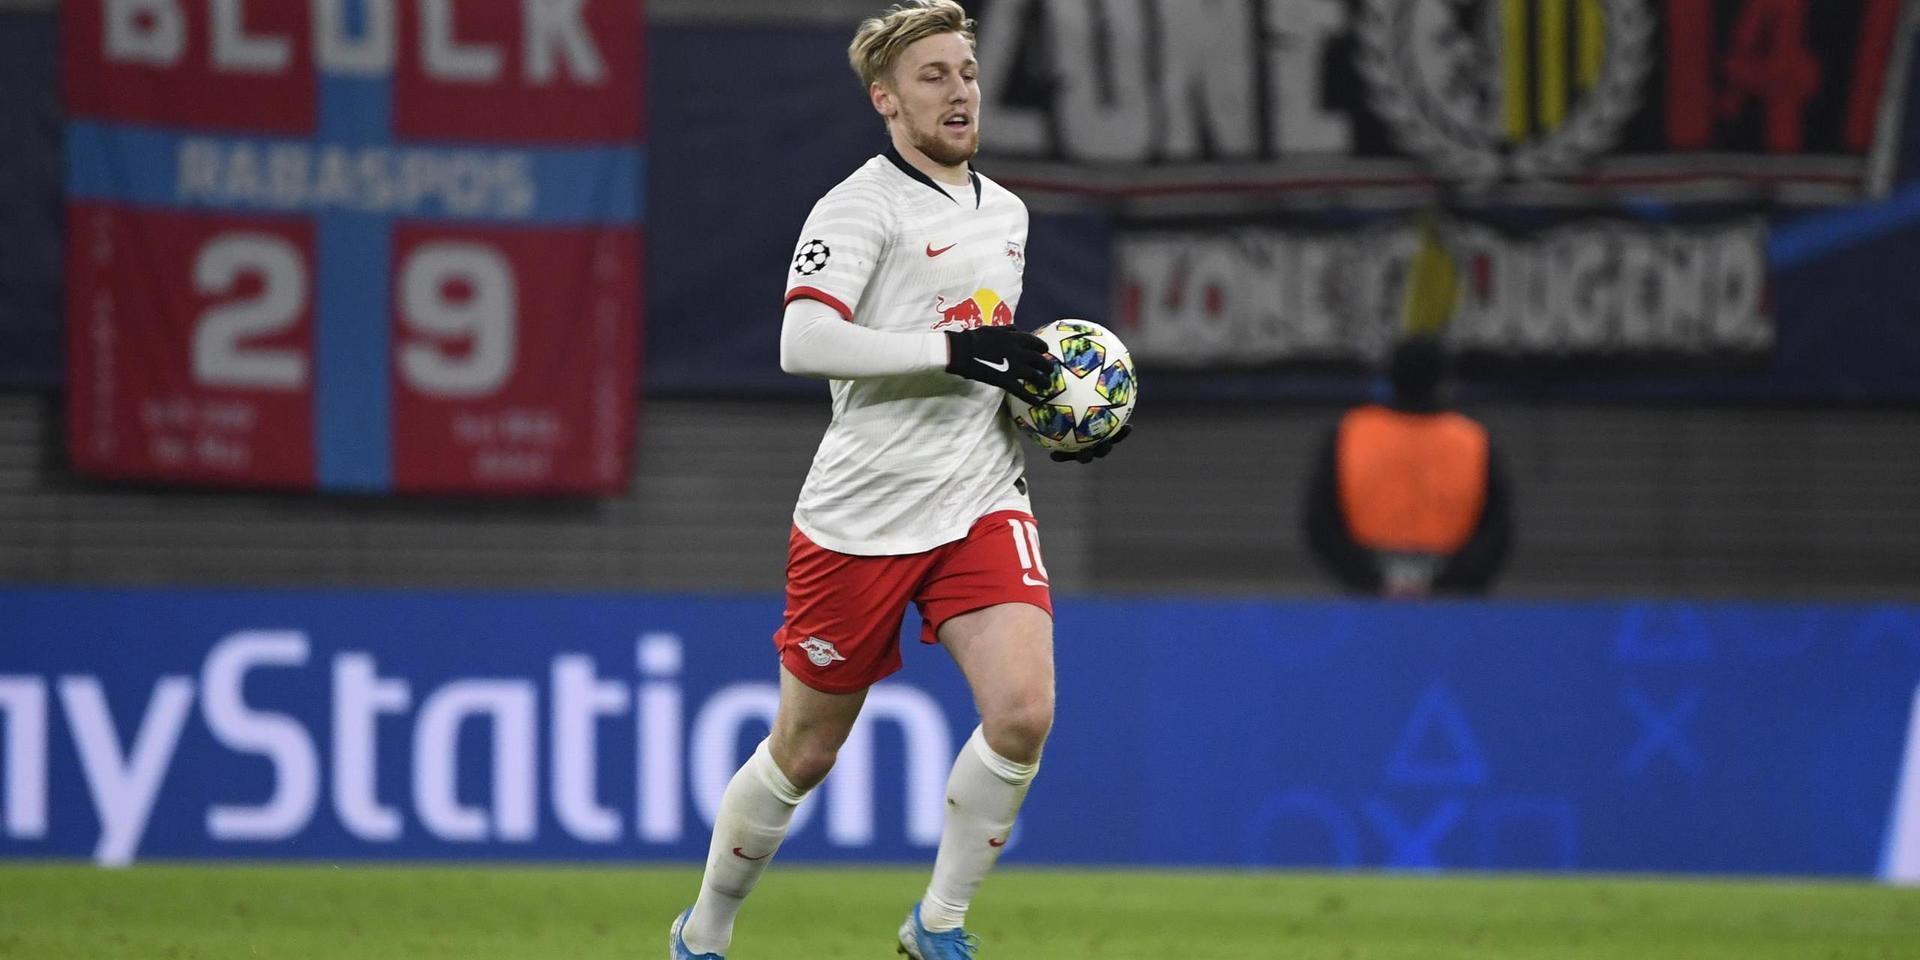 Leipzig&apos;s Emil Forsberg runs with the ball scoring a penalty during the Champions League group G soccer match between RB Leipzig and Benfica in Leipzig, Germany, Wednesday, Nov. 27, 2019. (AP Photo/Jens Meyer)  XPAG126